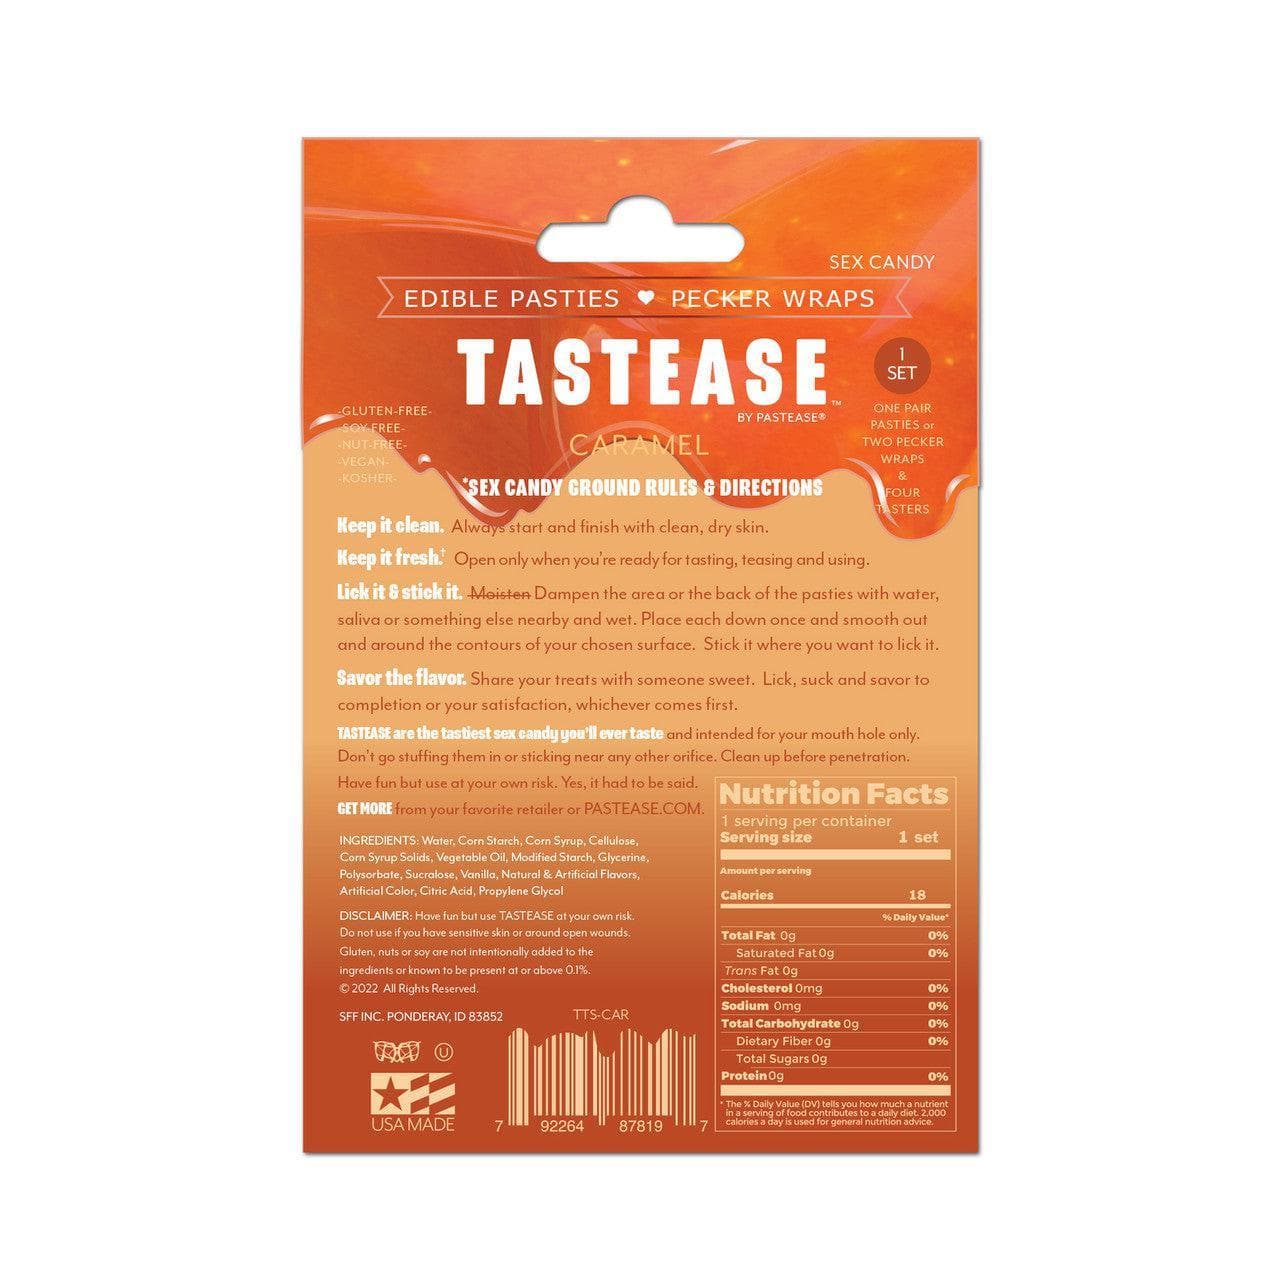 Tastease by Pastease Caramel Candy Edible Pasties & Pecker Wraps - Romantic Blessings